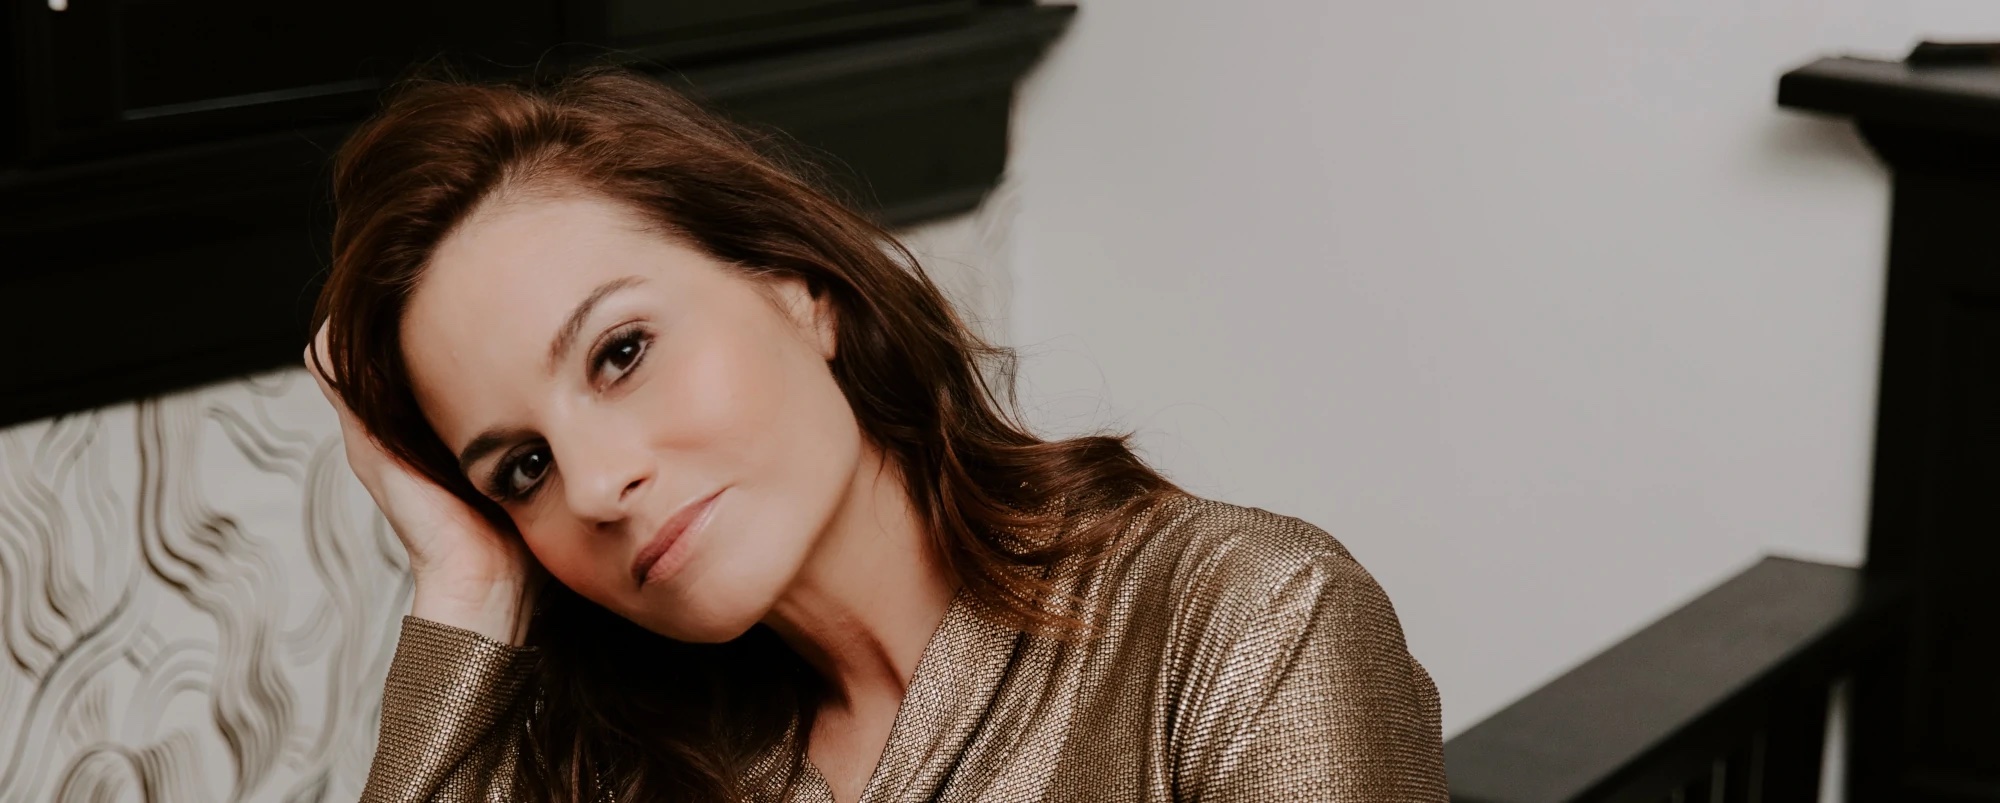 American Songwriter Welcomes Kara DioGuardi as 2022 Song Contest Judge